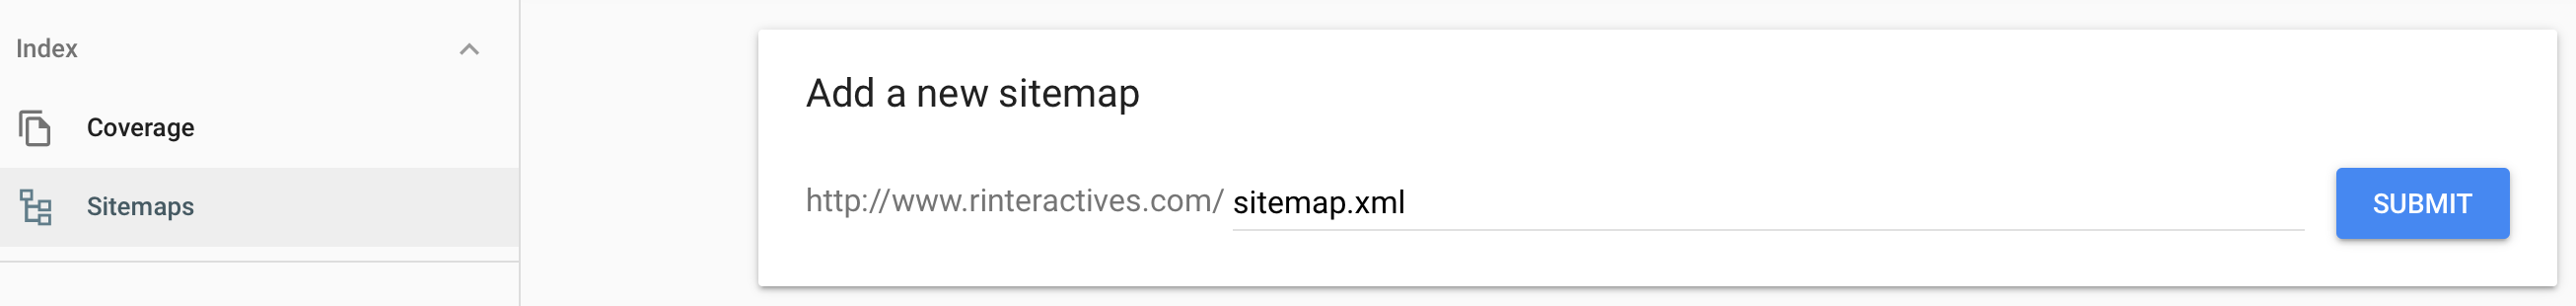 Sitemap URL Submission with Search Console